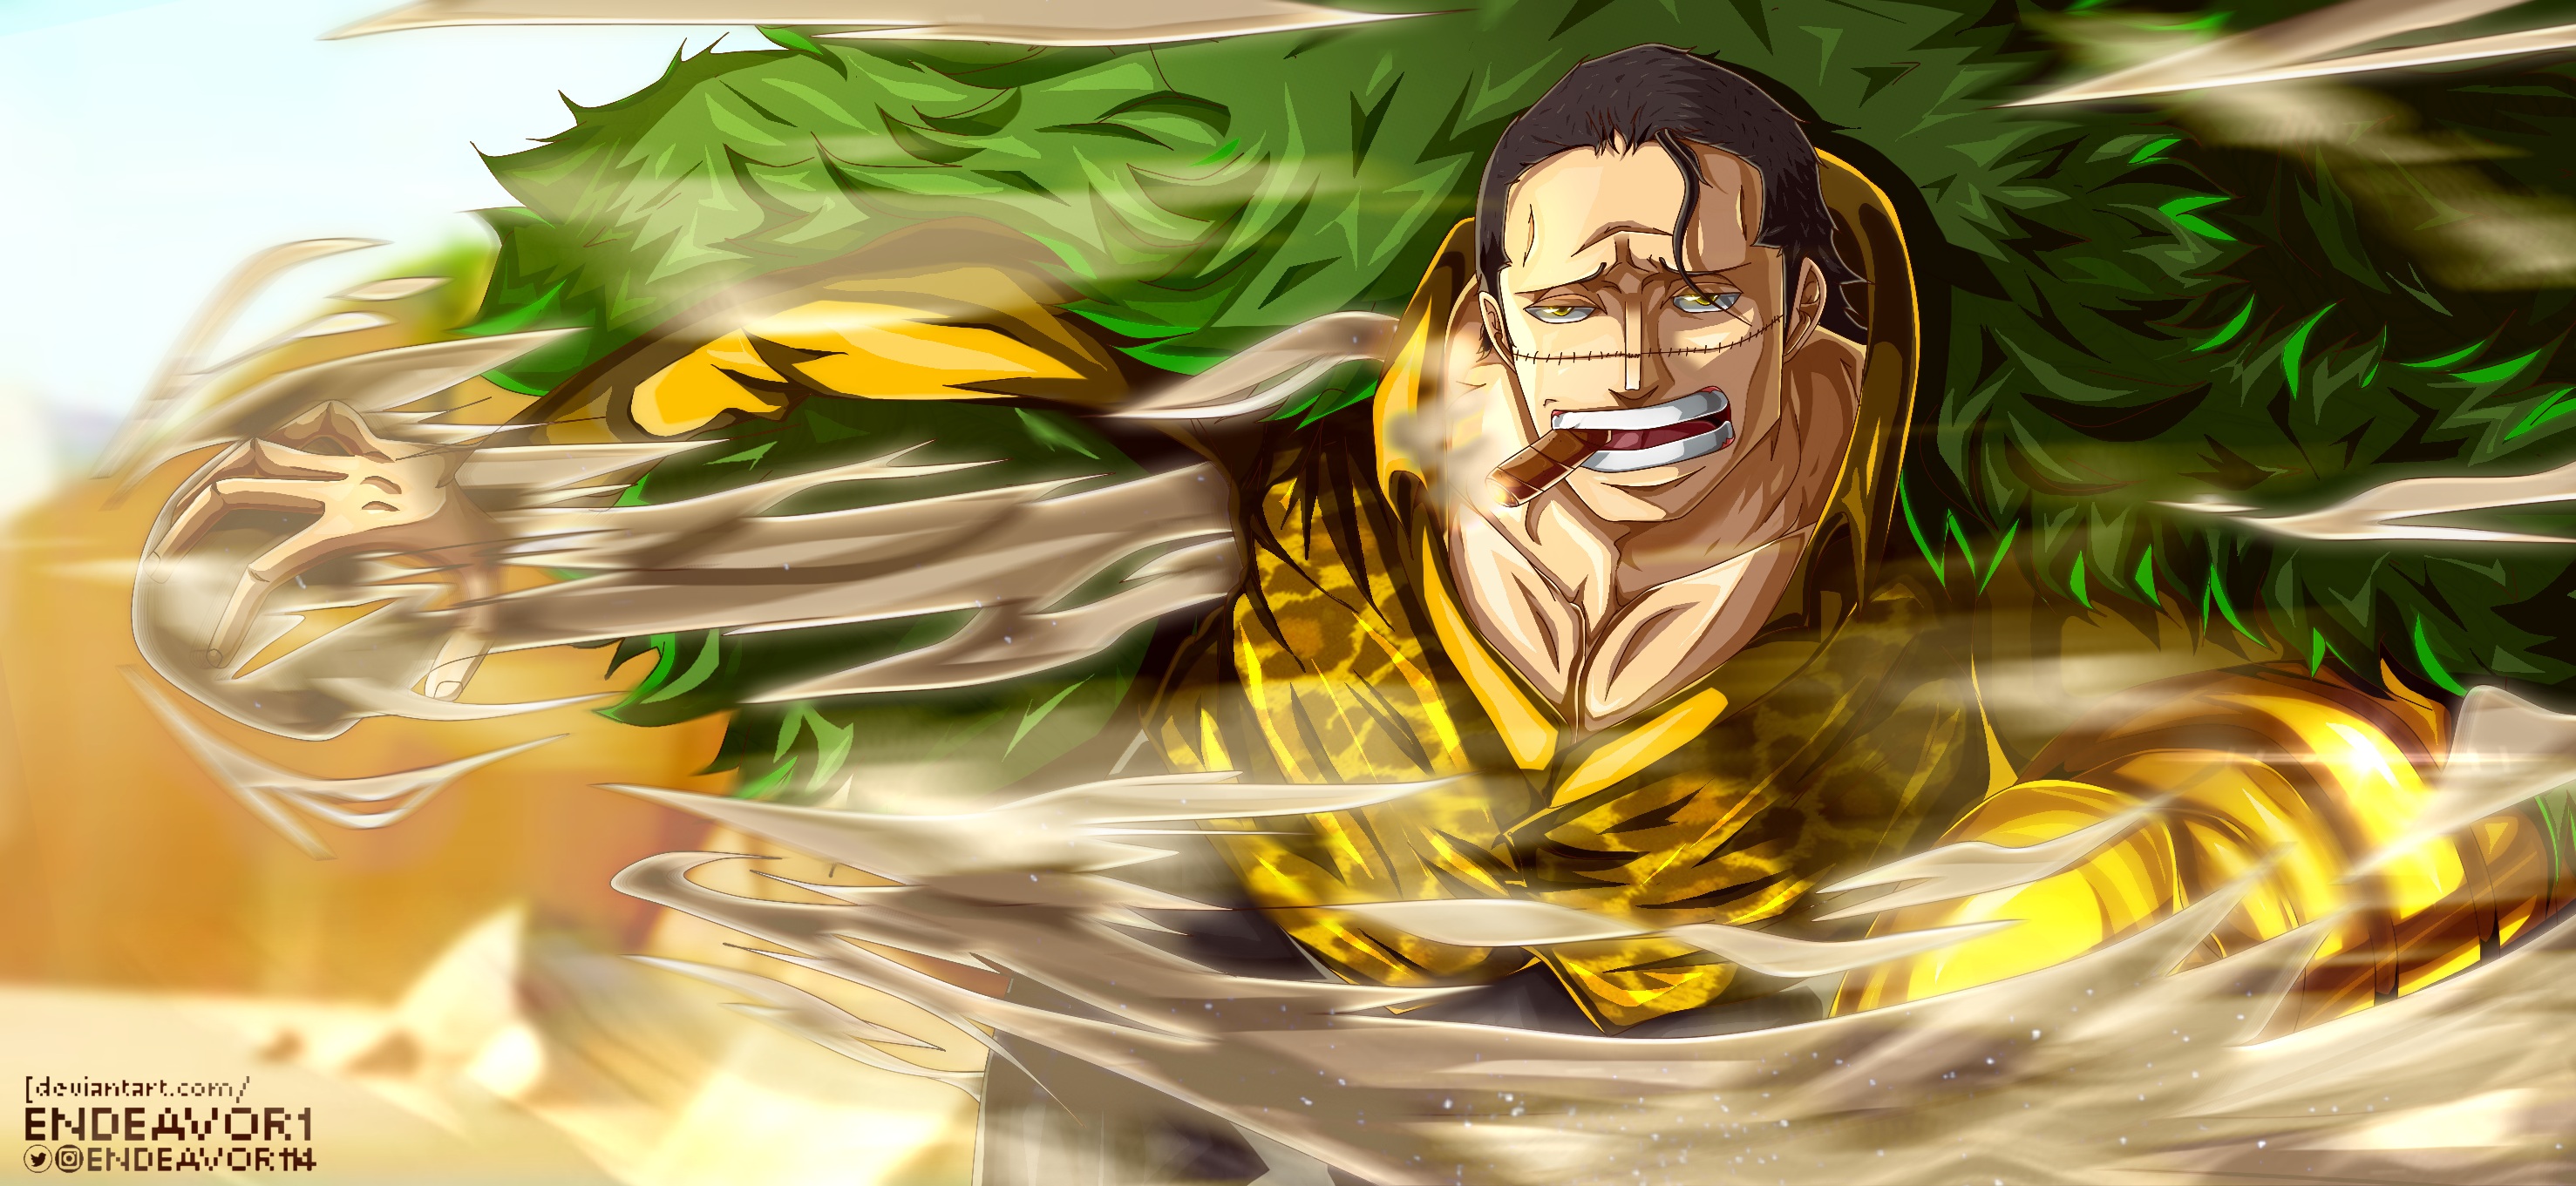 Anime One Piece HD Wallpaper by ENDEAVOR1